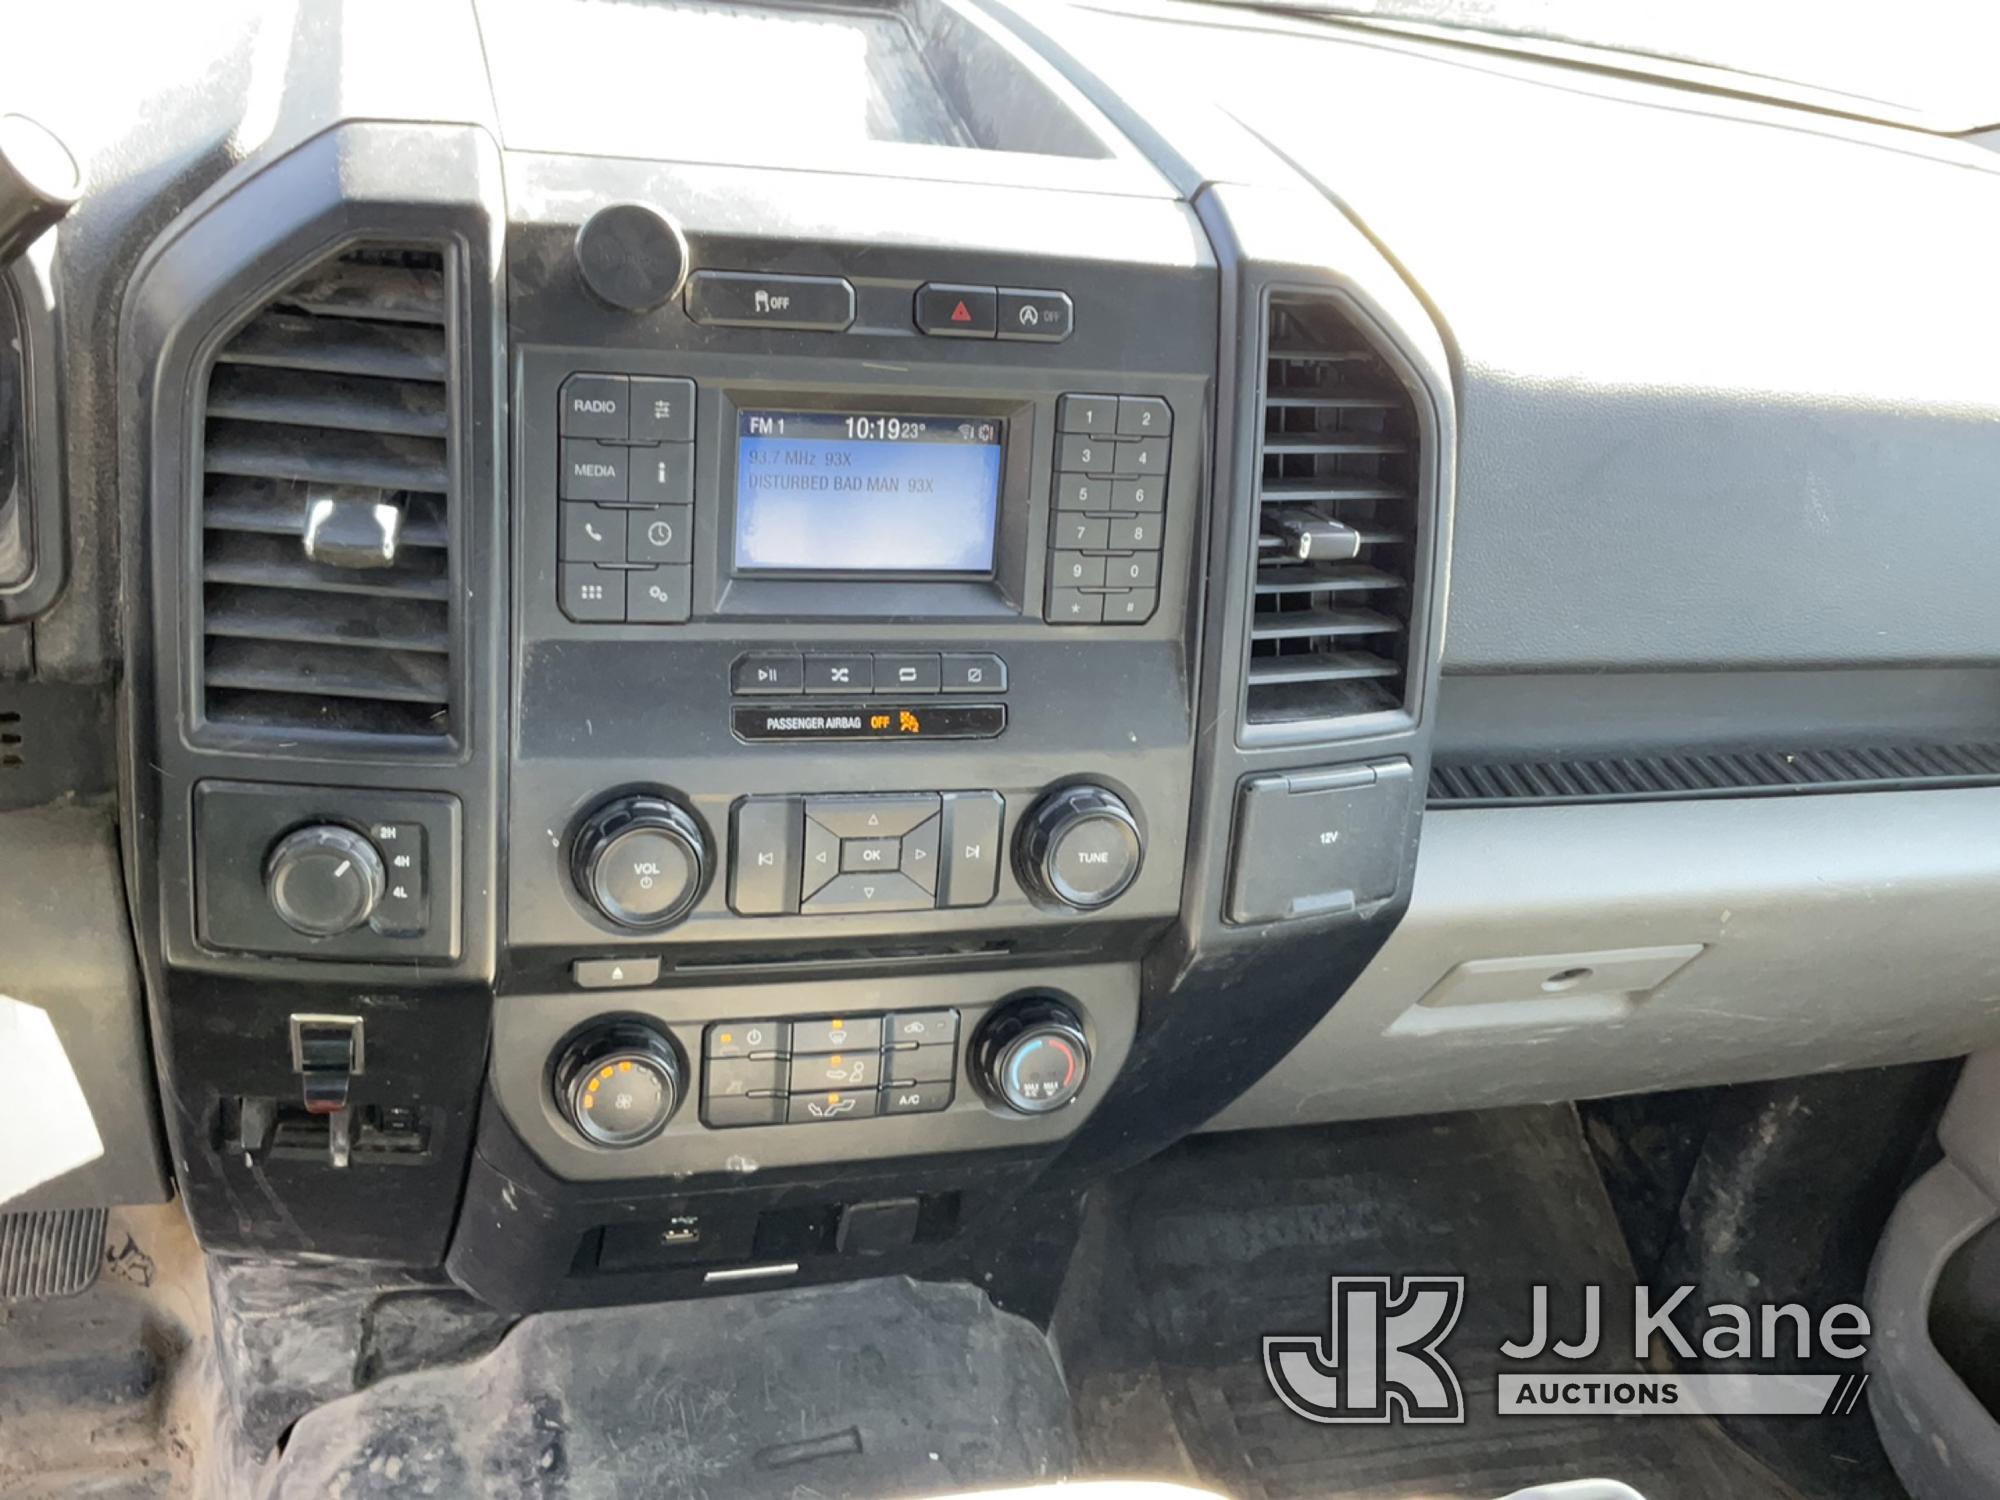 (Maple Lake, MN) 2018 Ford F150 4x4 Extended-Cab Pickup Truck Runs And Moves. Check Engine Light On.